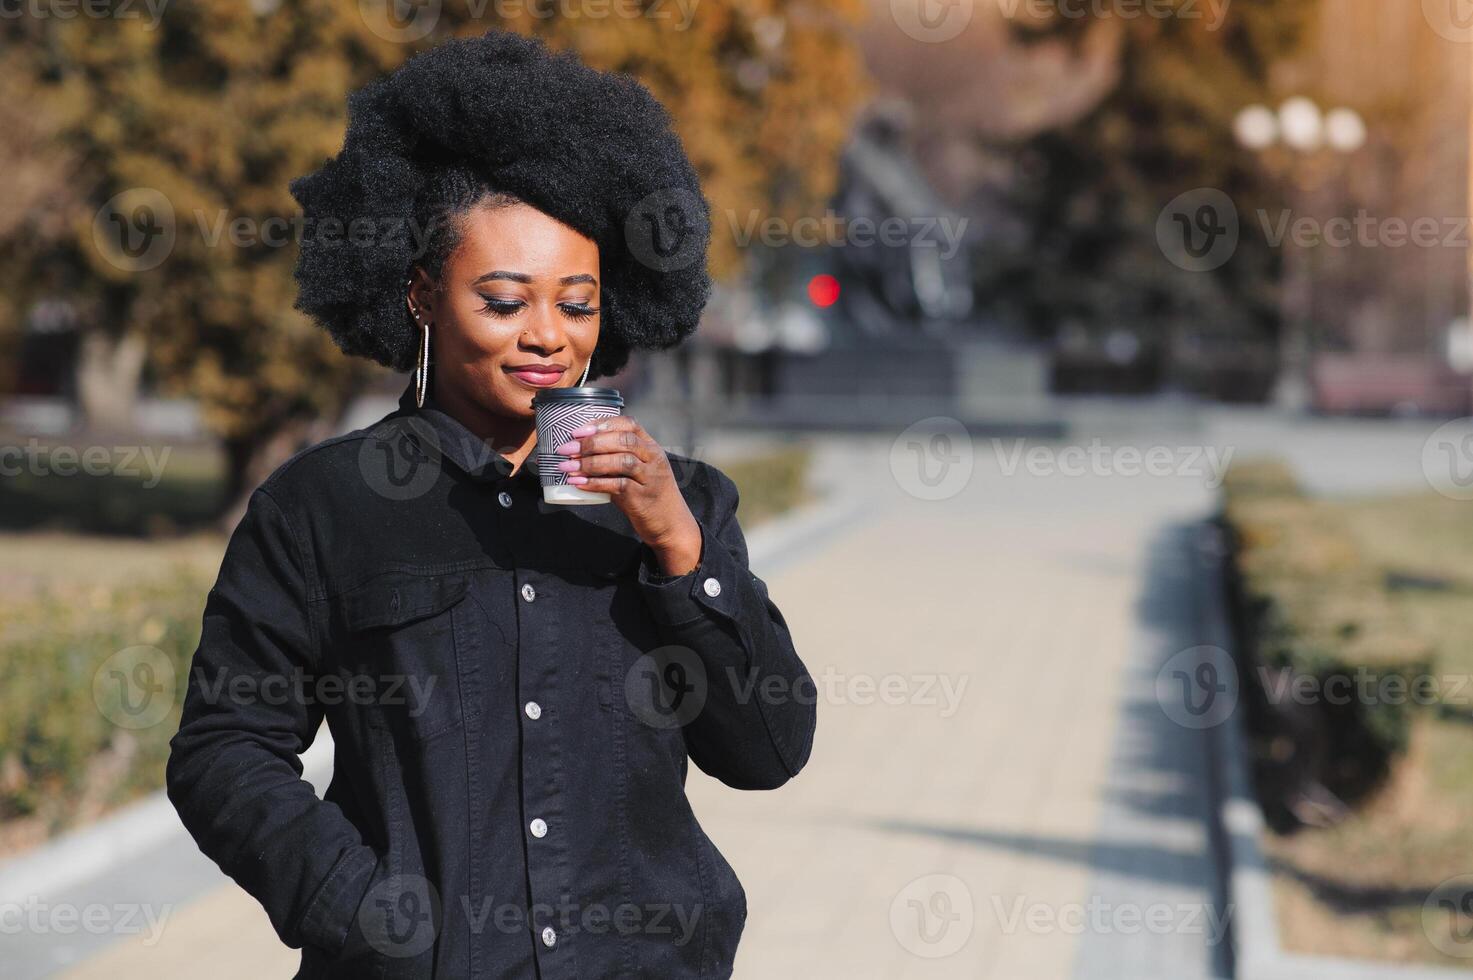 Cheerful dark skinned woman enjoying coffee holding to go cup recreating in city park, happy trendy dressed african american hipster girl sitting outdoors during sunny day drinking beverage photo